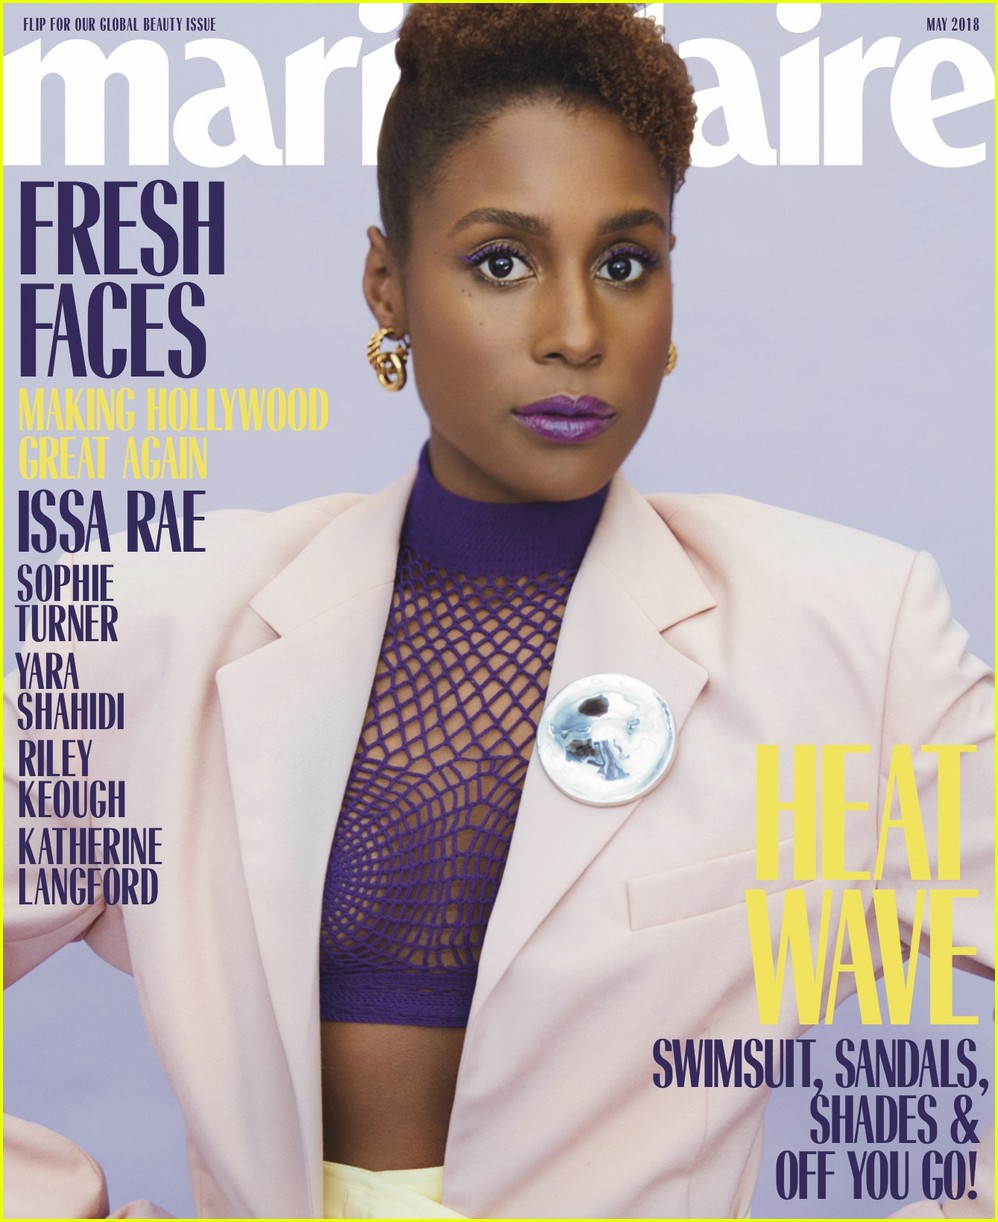 issa rae marie claire 01